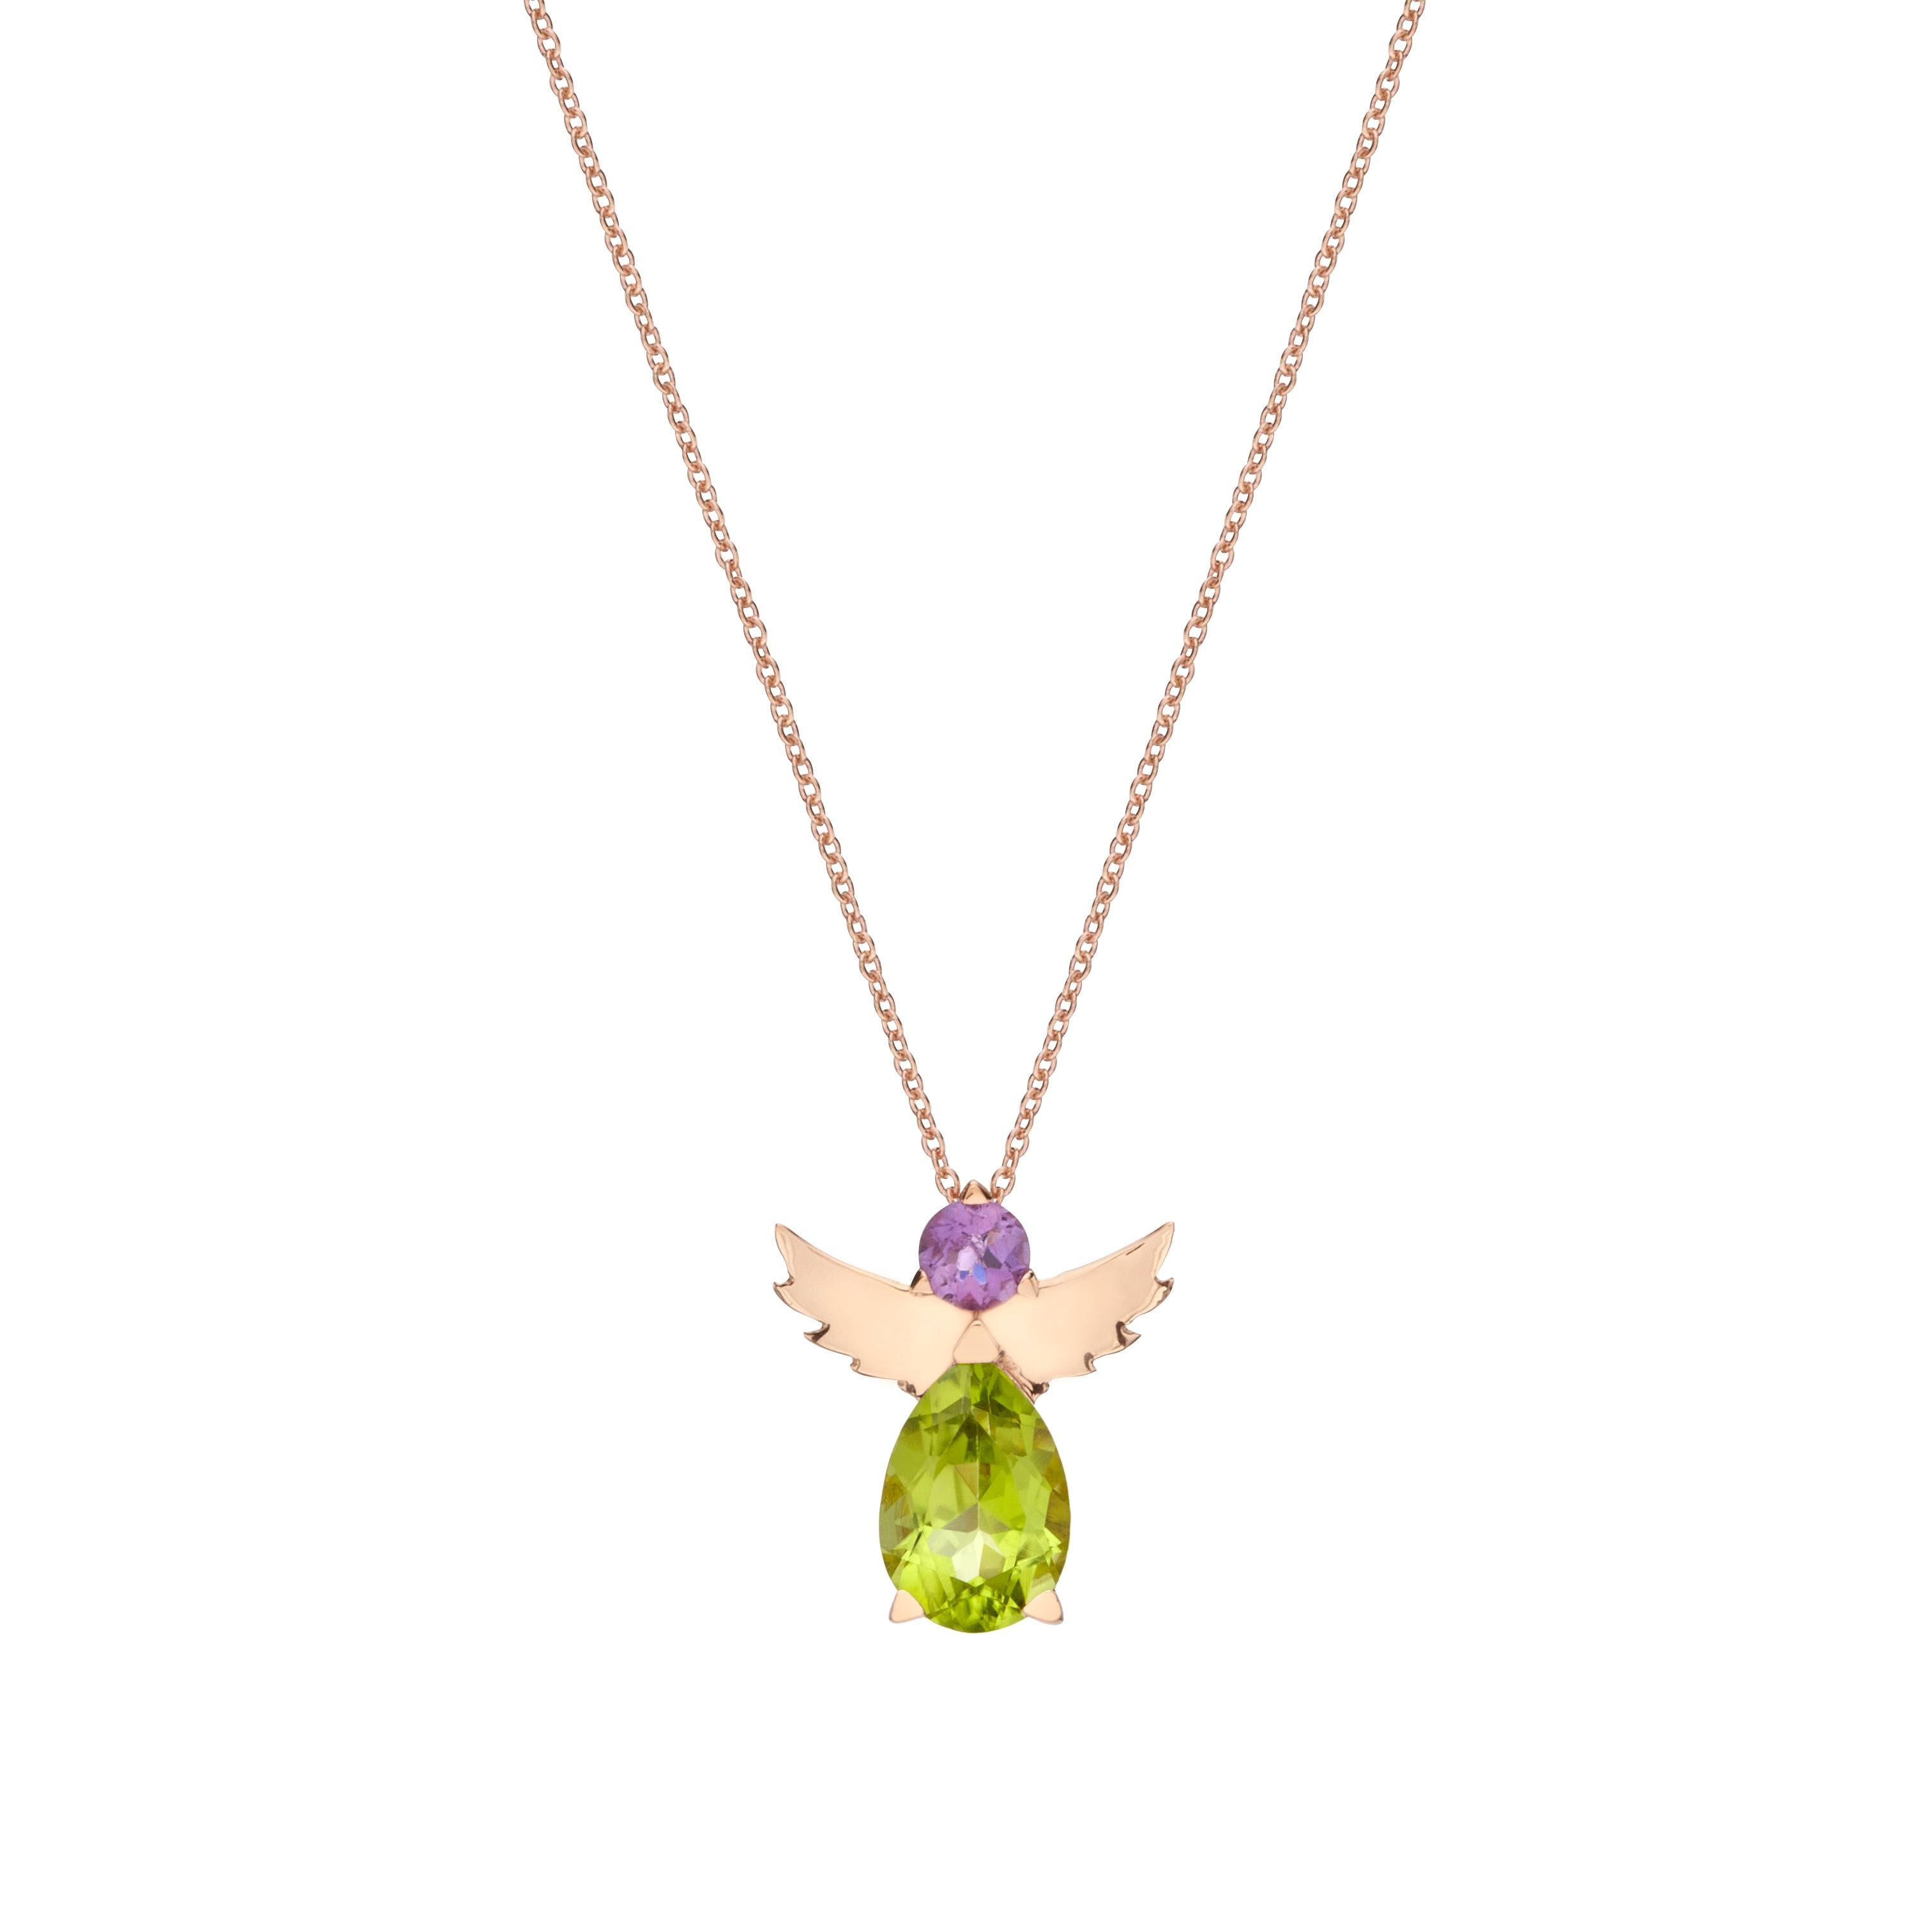 Angel Pendant Necklace in 18kt Rose Gold Purple Αmethyst and Green Peridot Gift In New Condition For Sale In Athens, GR